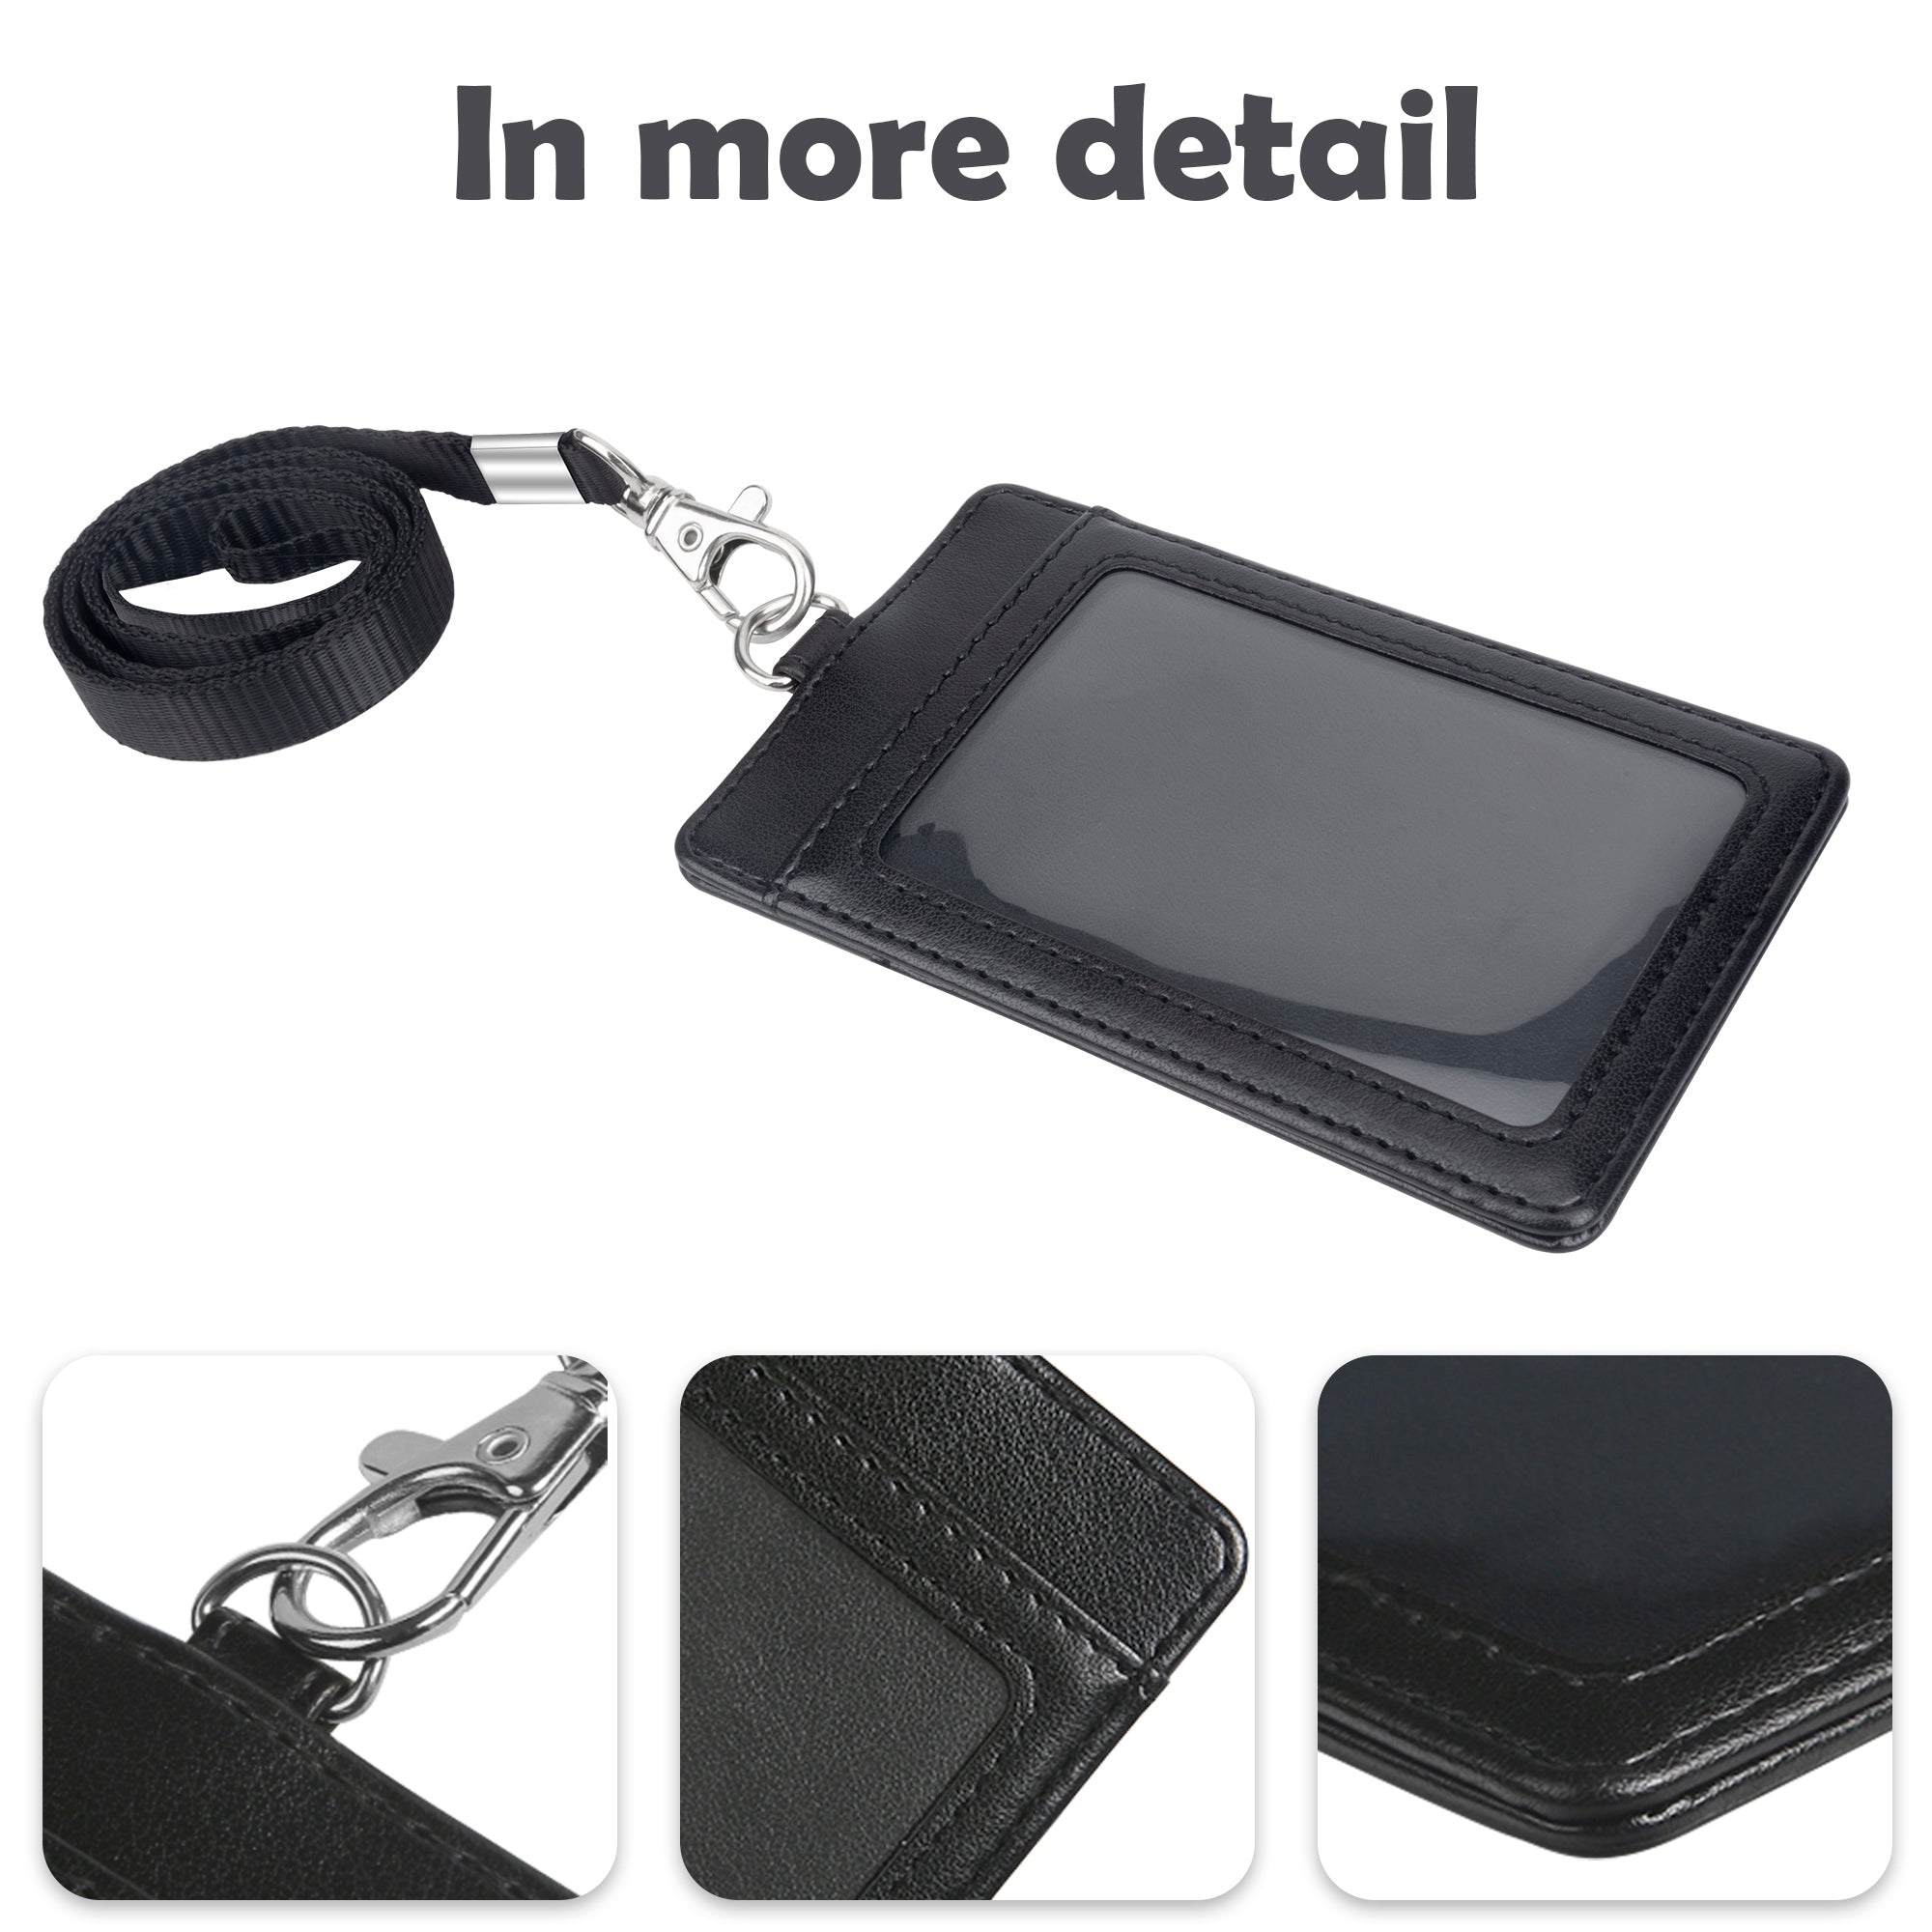 Black Leather ID Card Holder, For Office